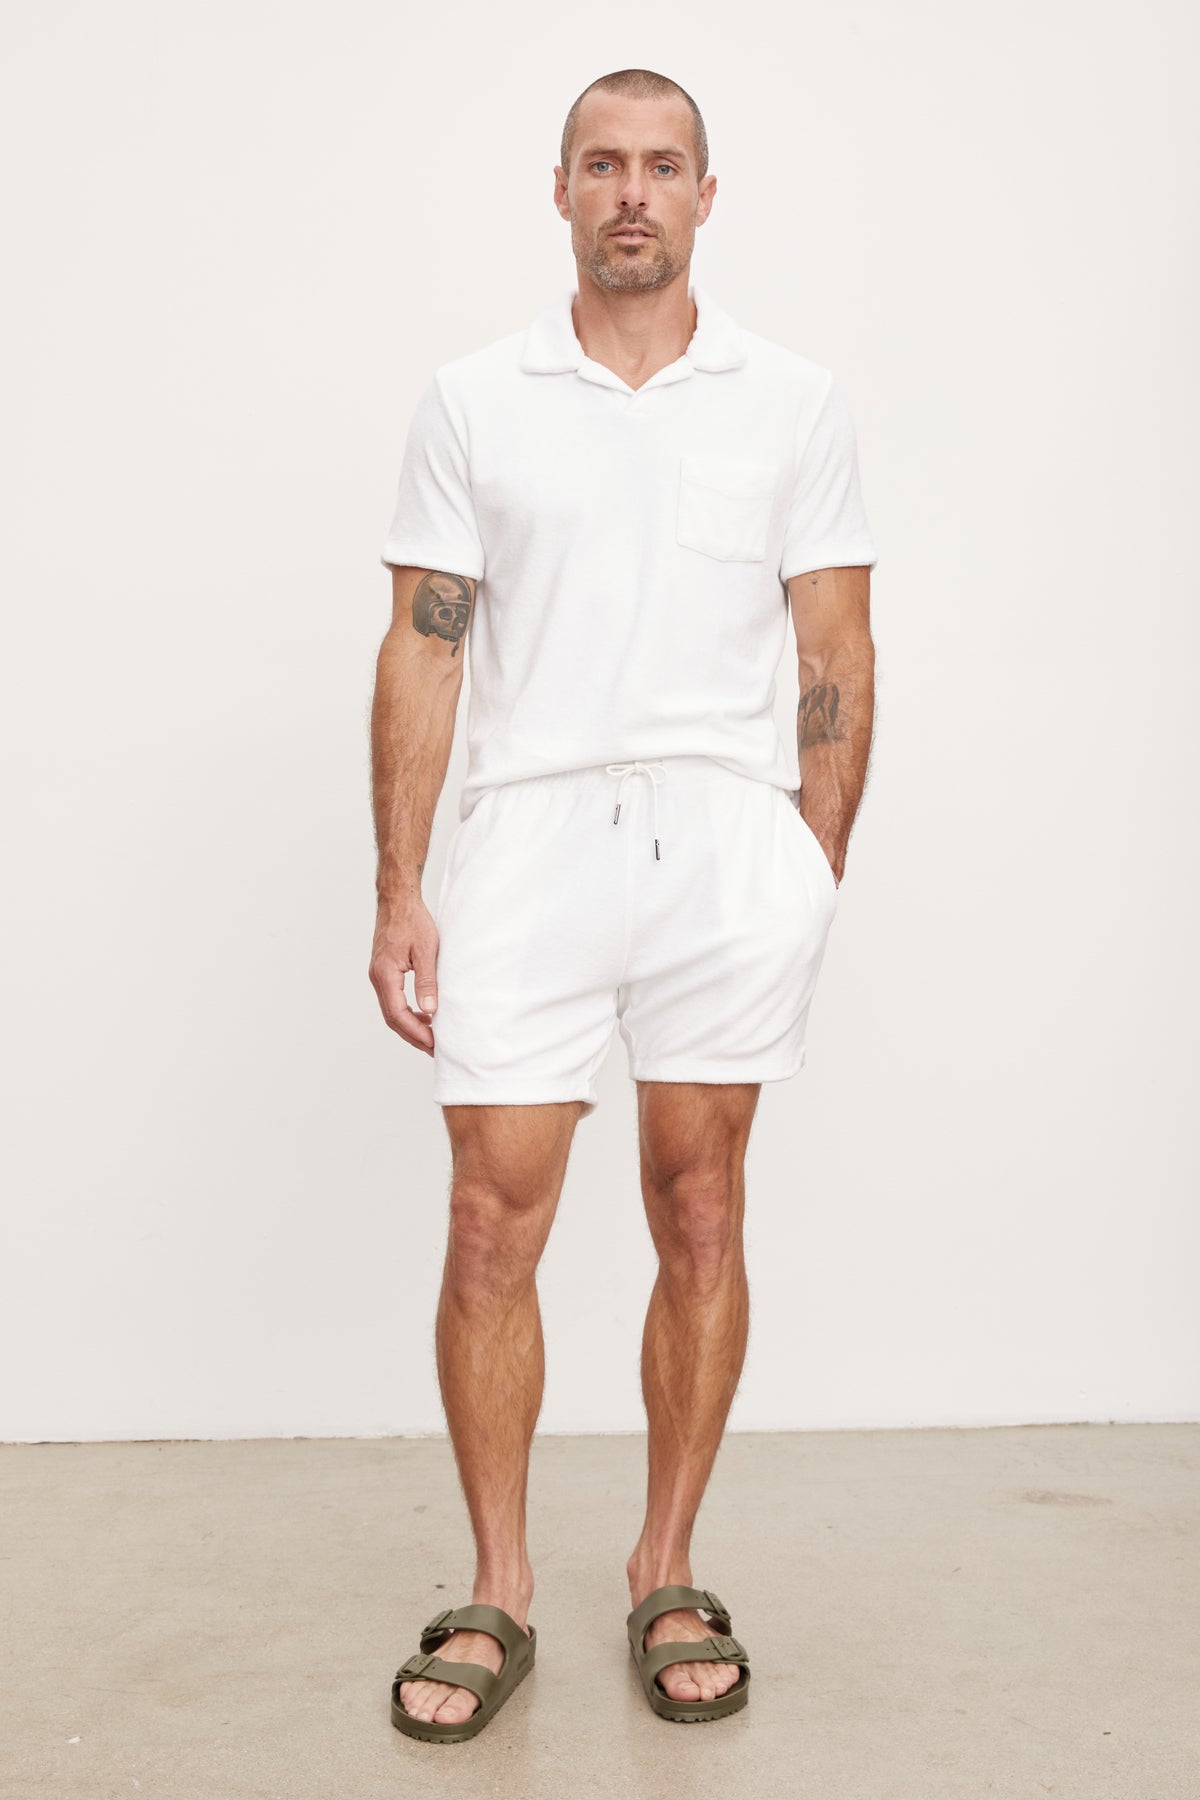 A man wearing a white polo shirt and Velvet by Graham & Spencer's SALEM SHORT drawstring elastic waist lounging shorts stands against a plain background, sporting sandals and visible tattoos on his arms.-36943667822785